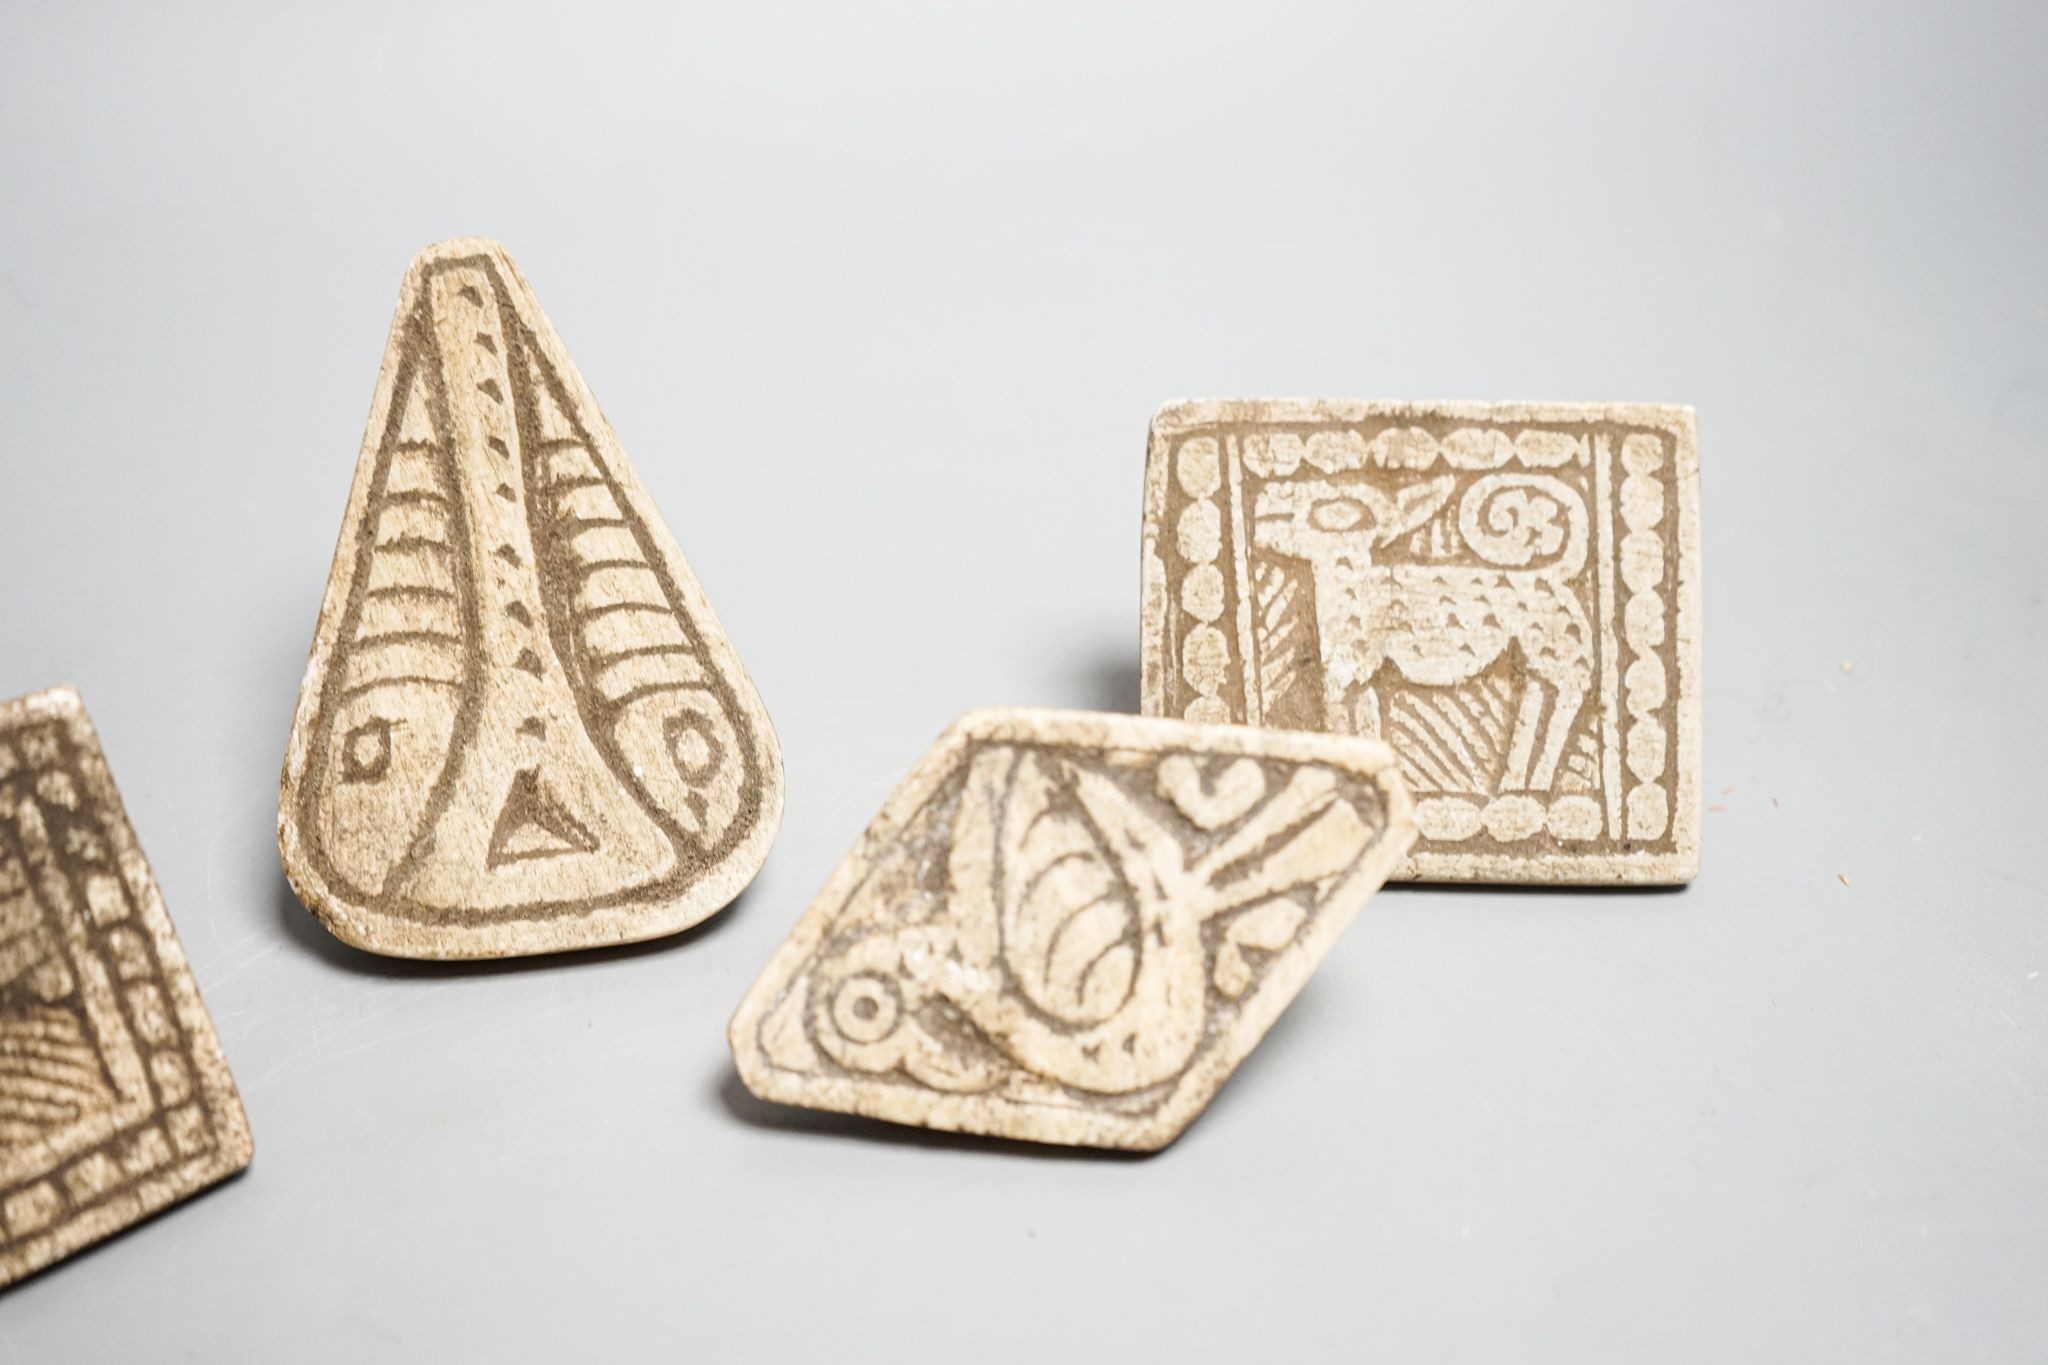 A group of five Middle eastern ceramic moulds/stamps